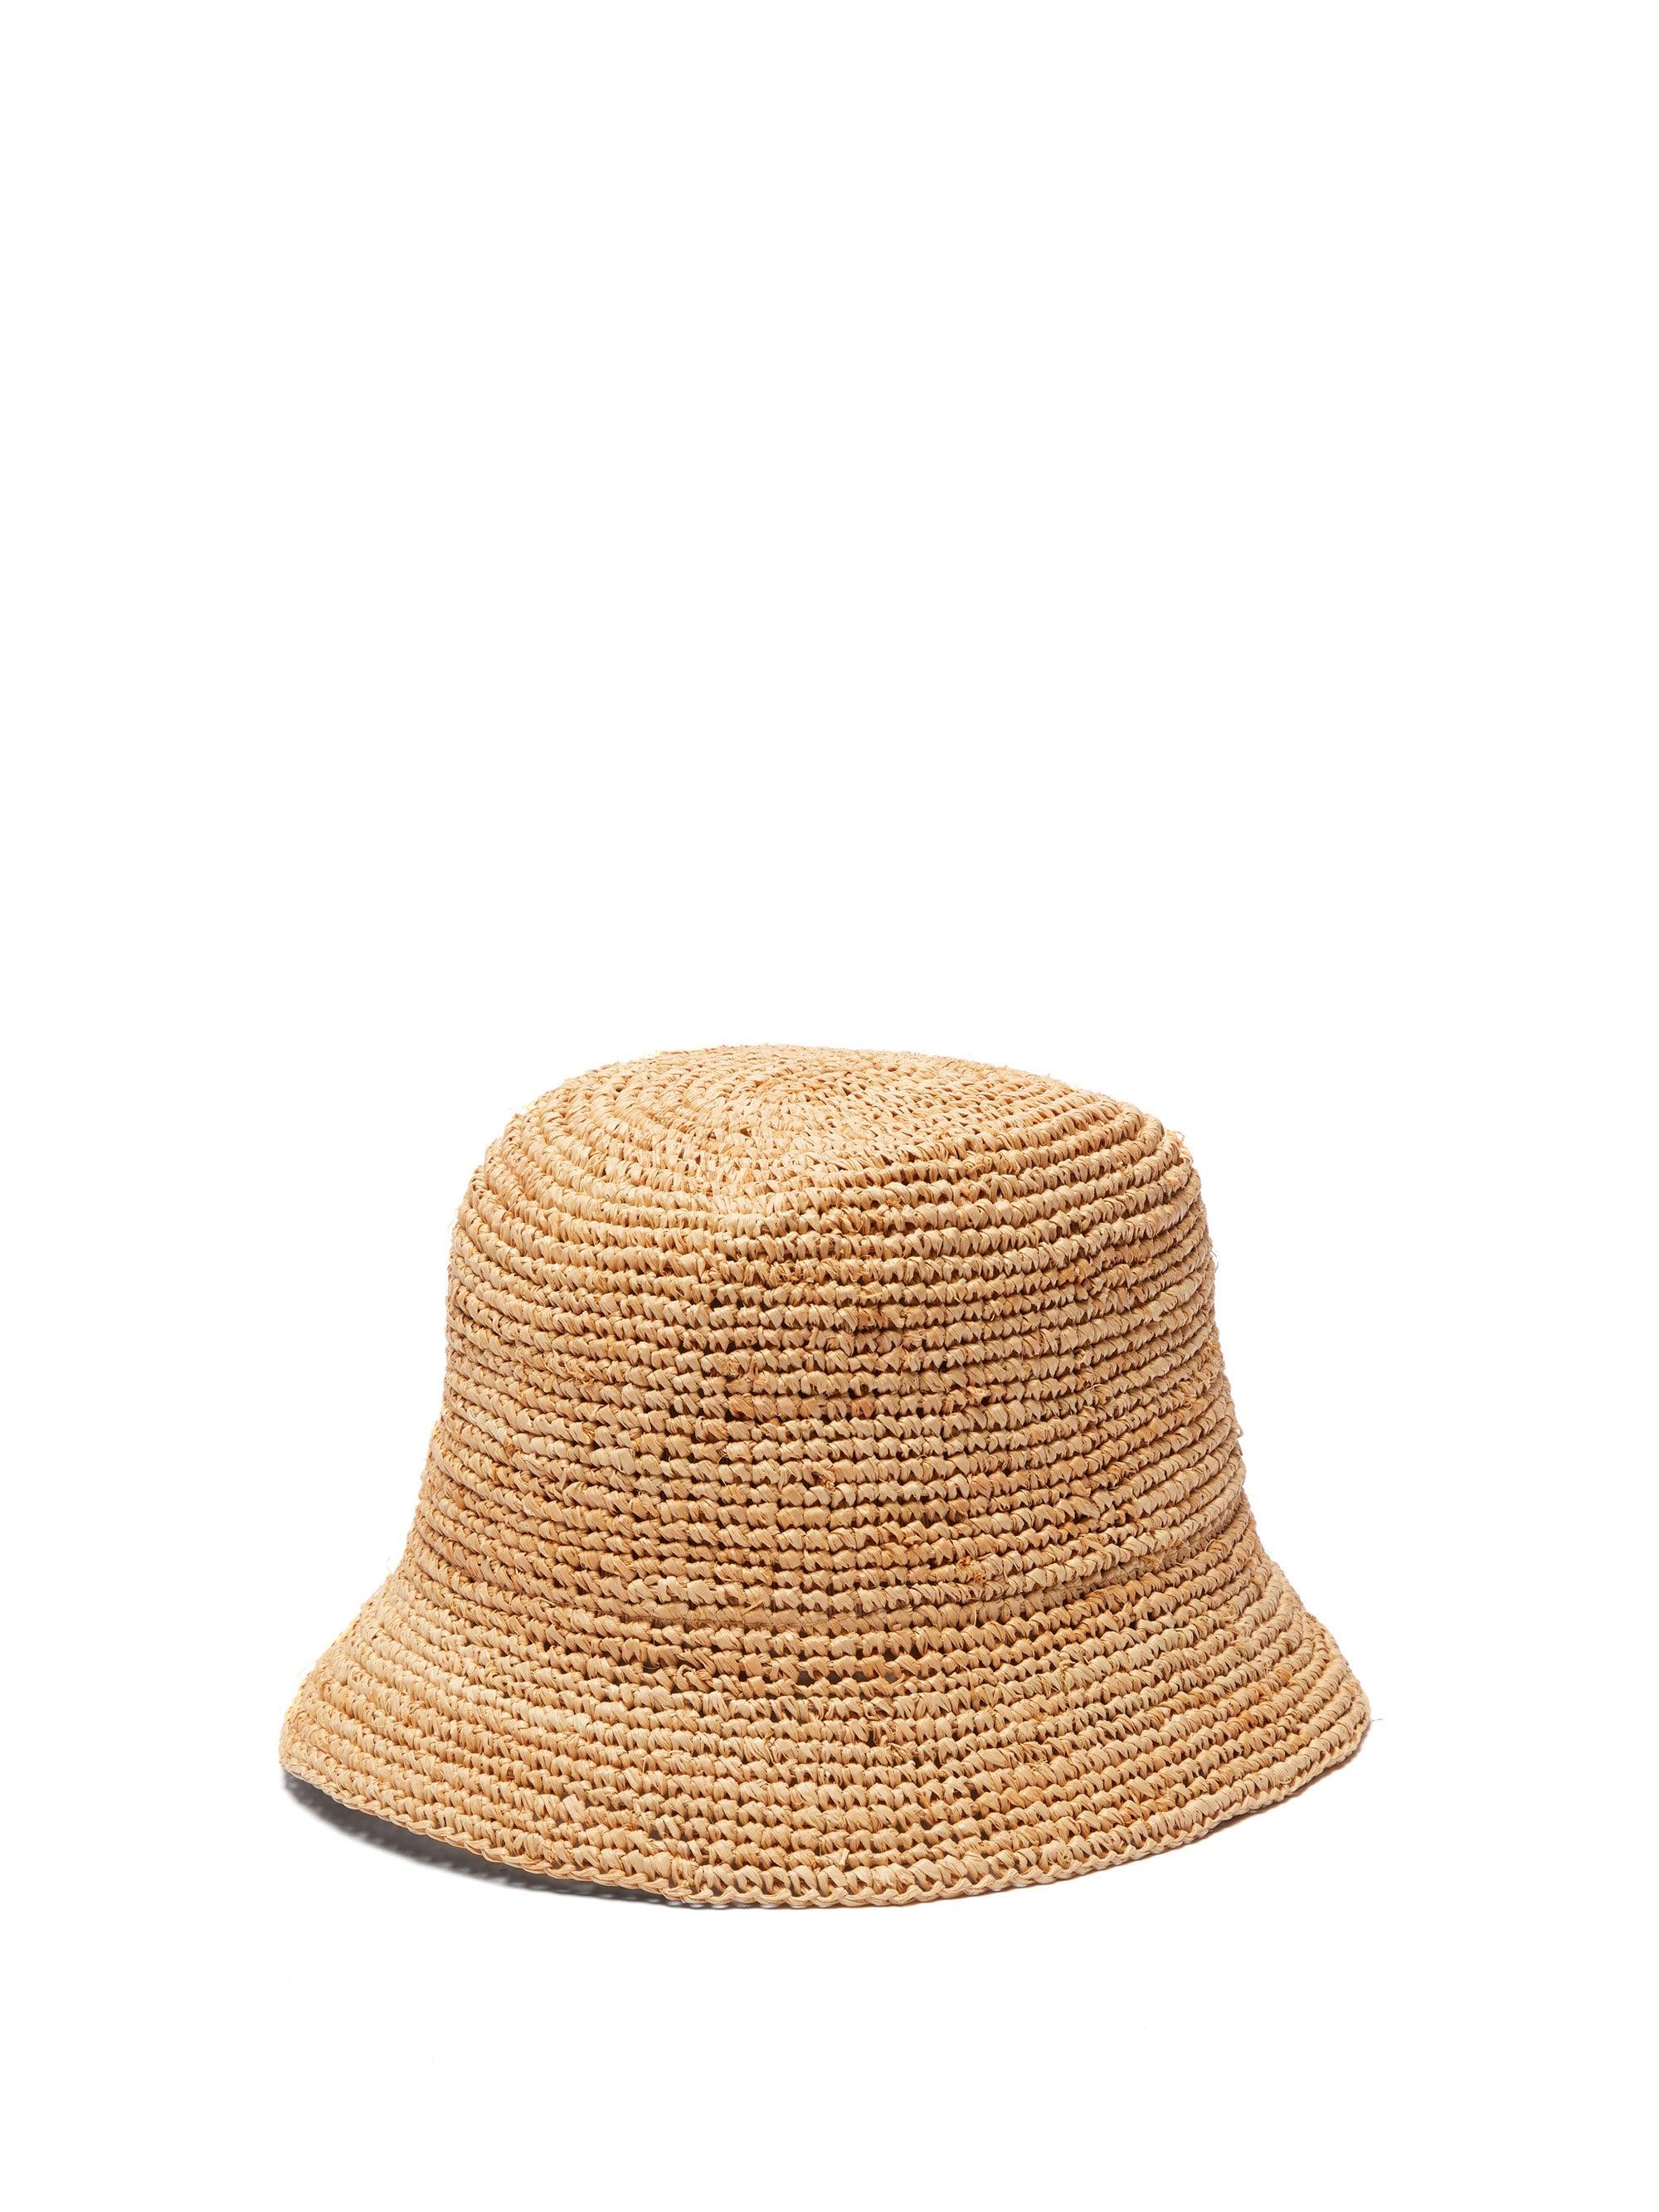 Gucci Straw Bucket Hat in Natural | Lyst